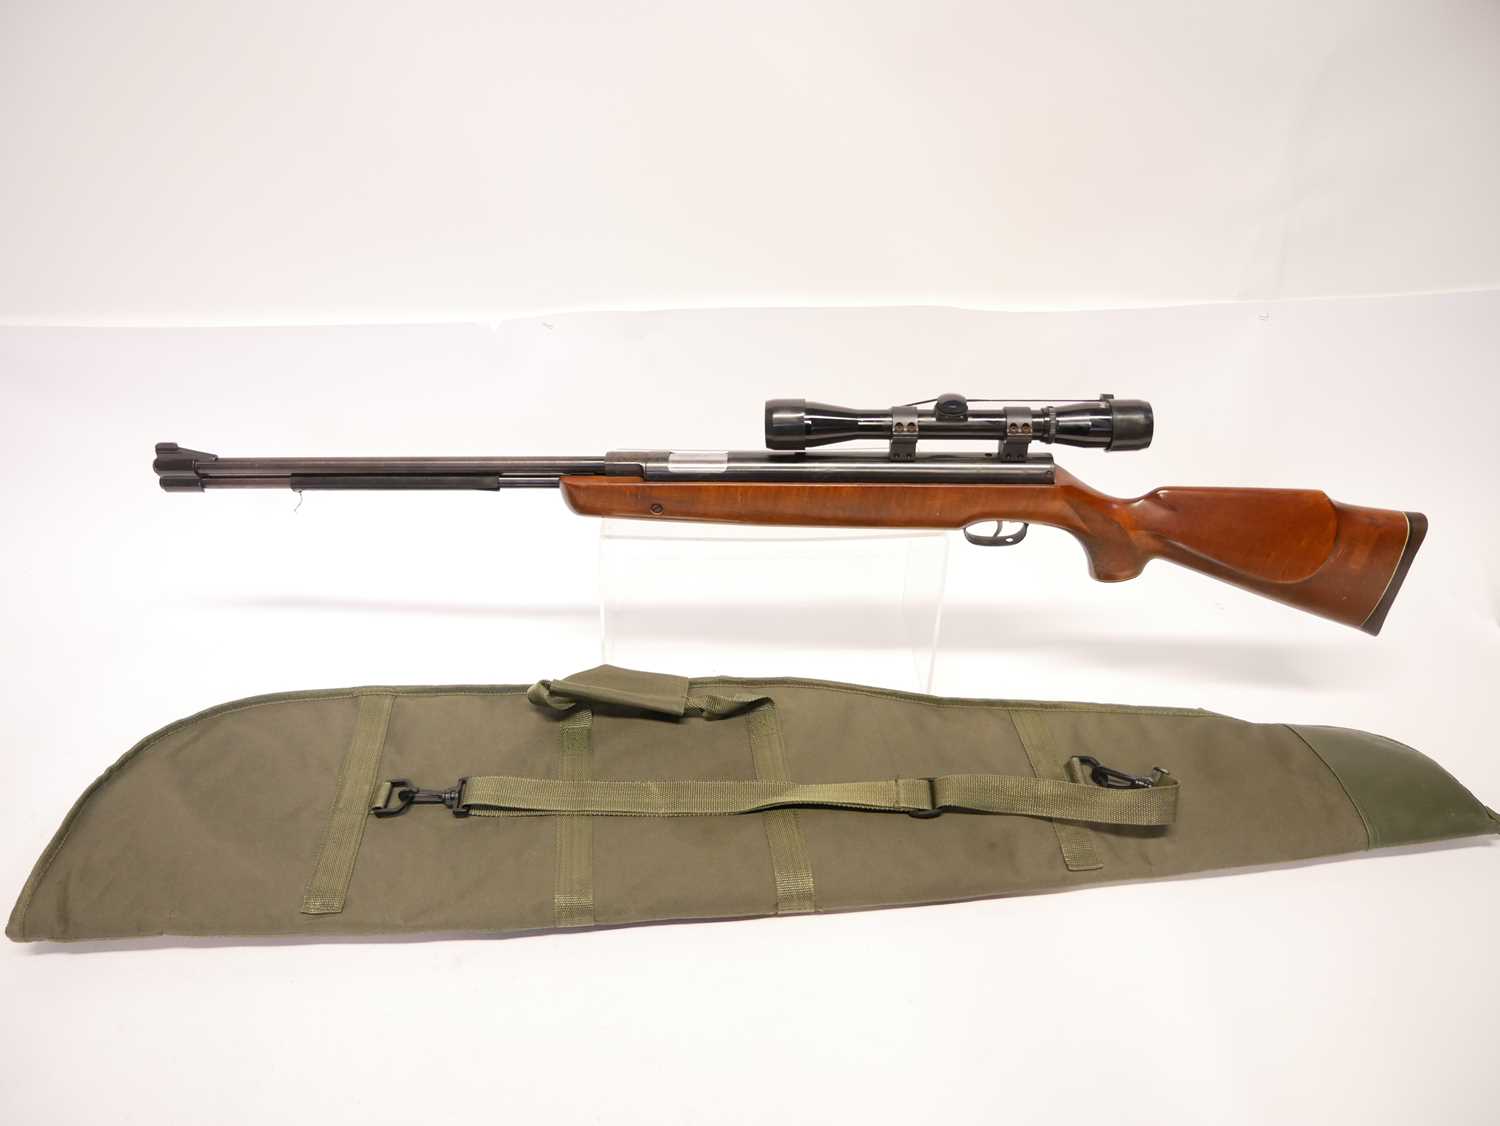 Weihrauch HW77 .22 air rifle serial number 1002371, 18 inch barrel, with Apollo 4x32 scope and a - Image 10 of 10